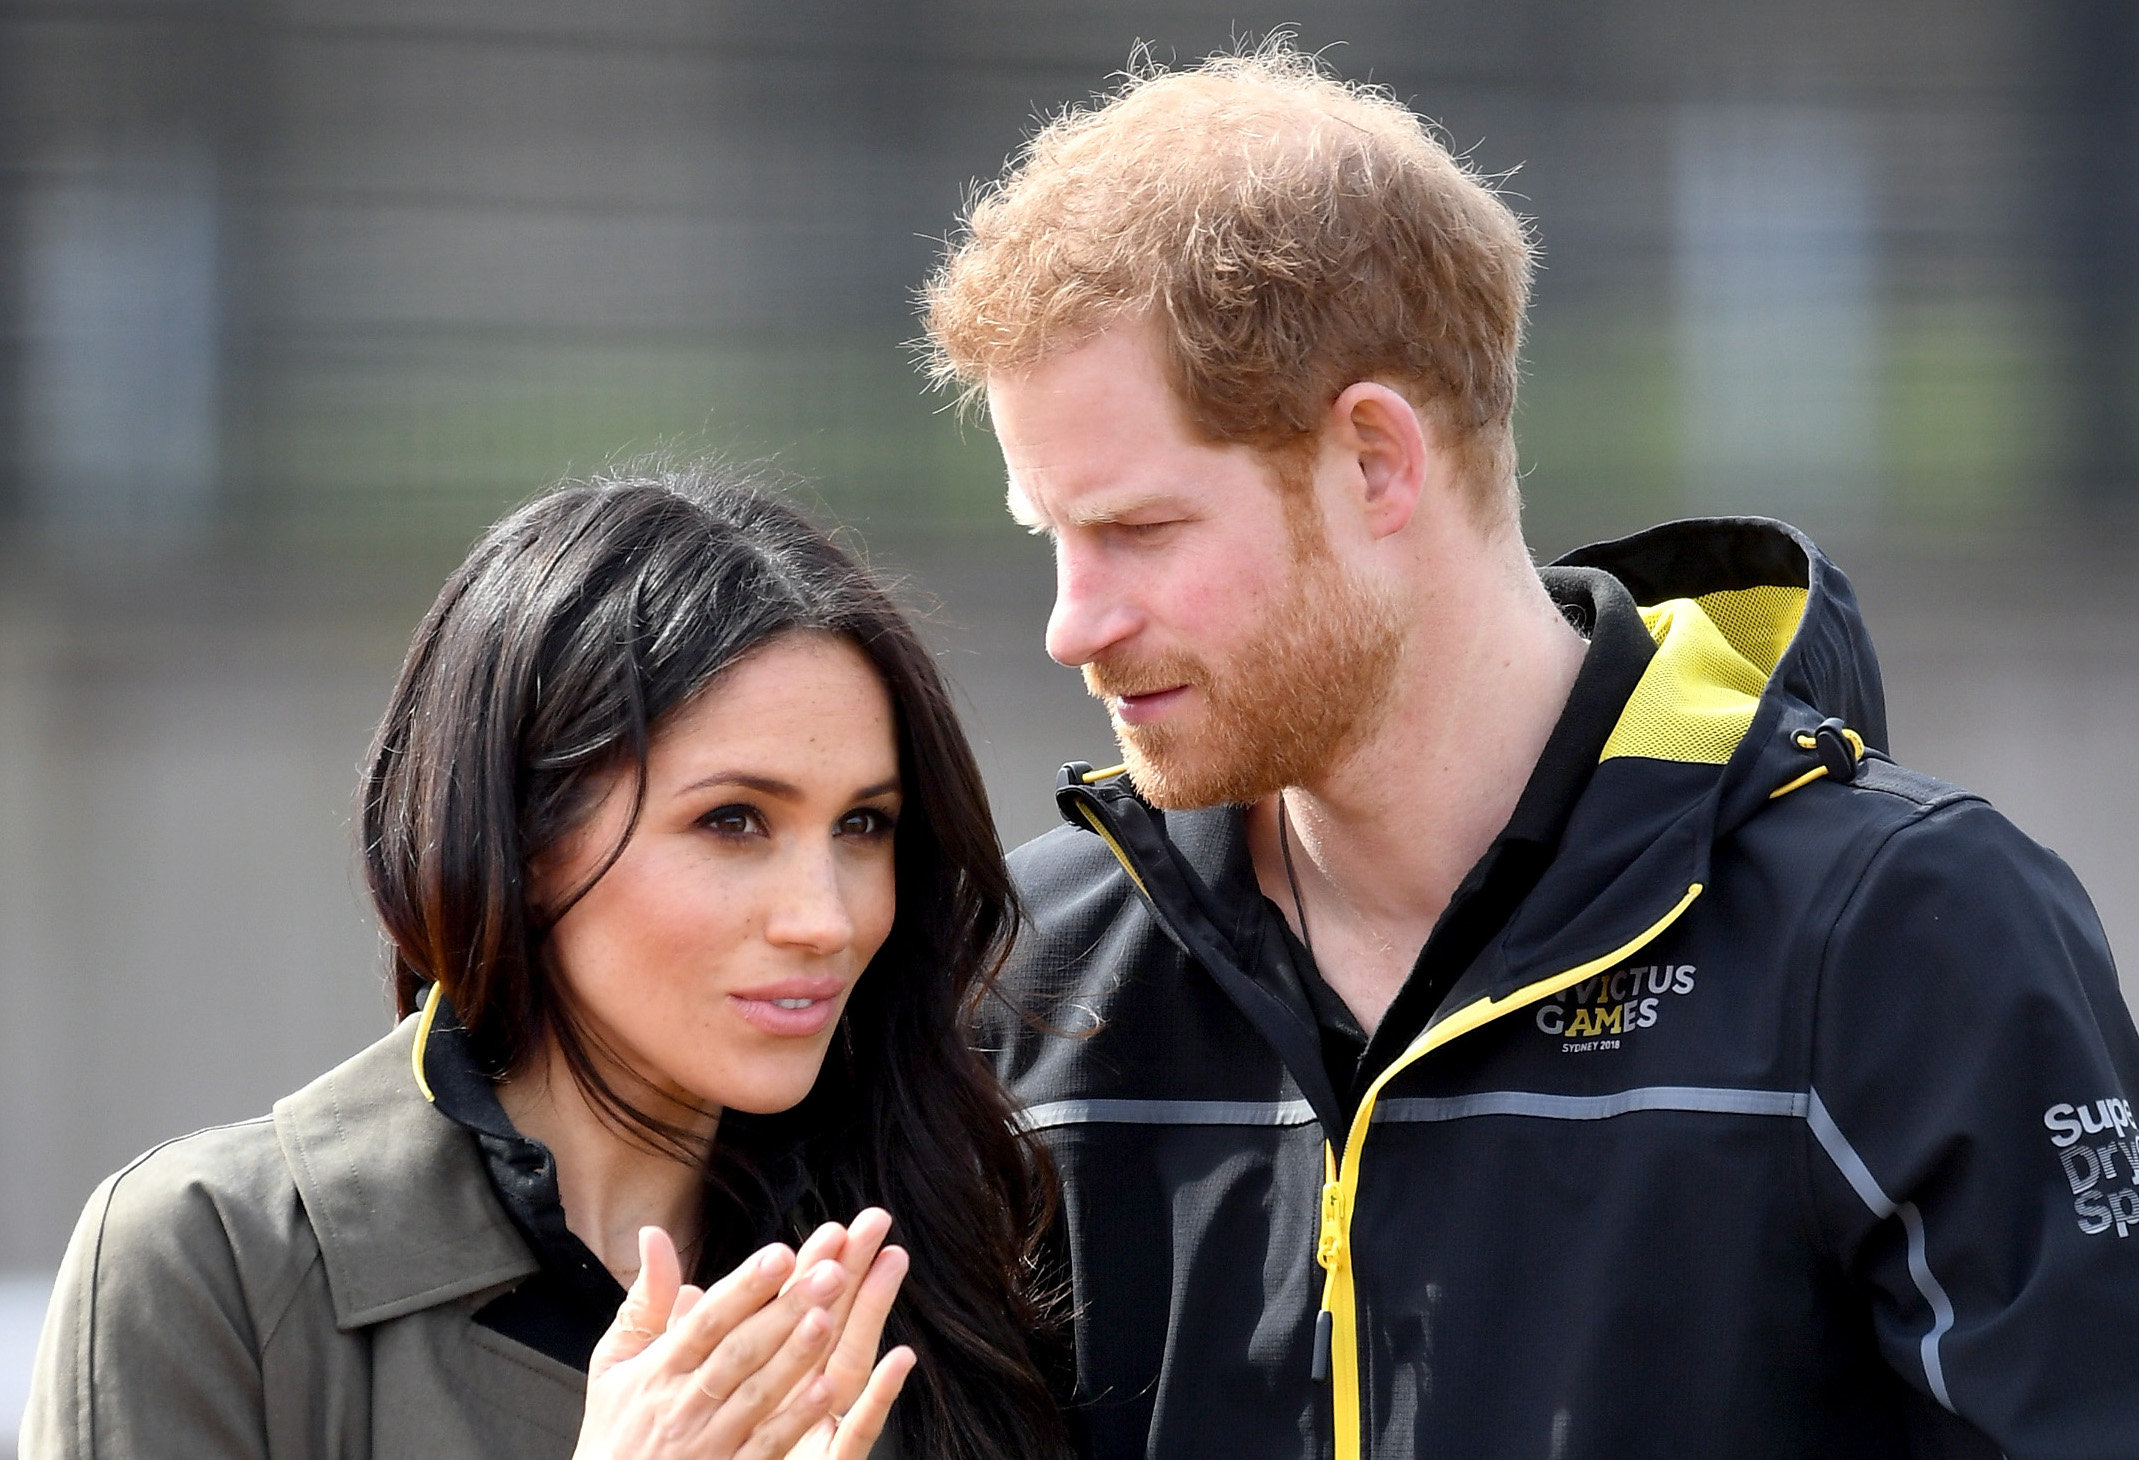 Prince Harry, Meghan Markle, and her mother had a dangerous encounter with paparazzi while driving.